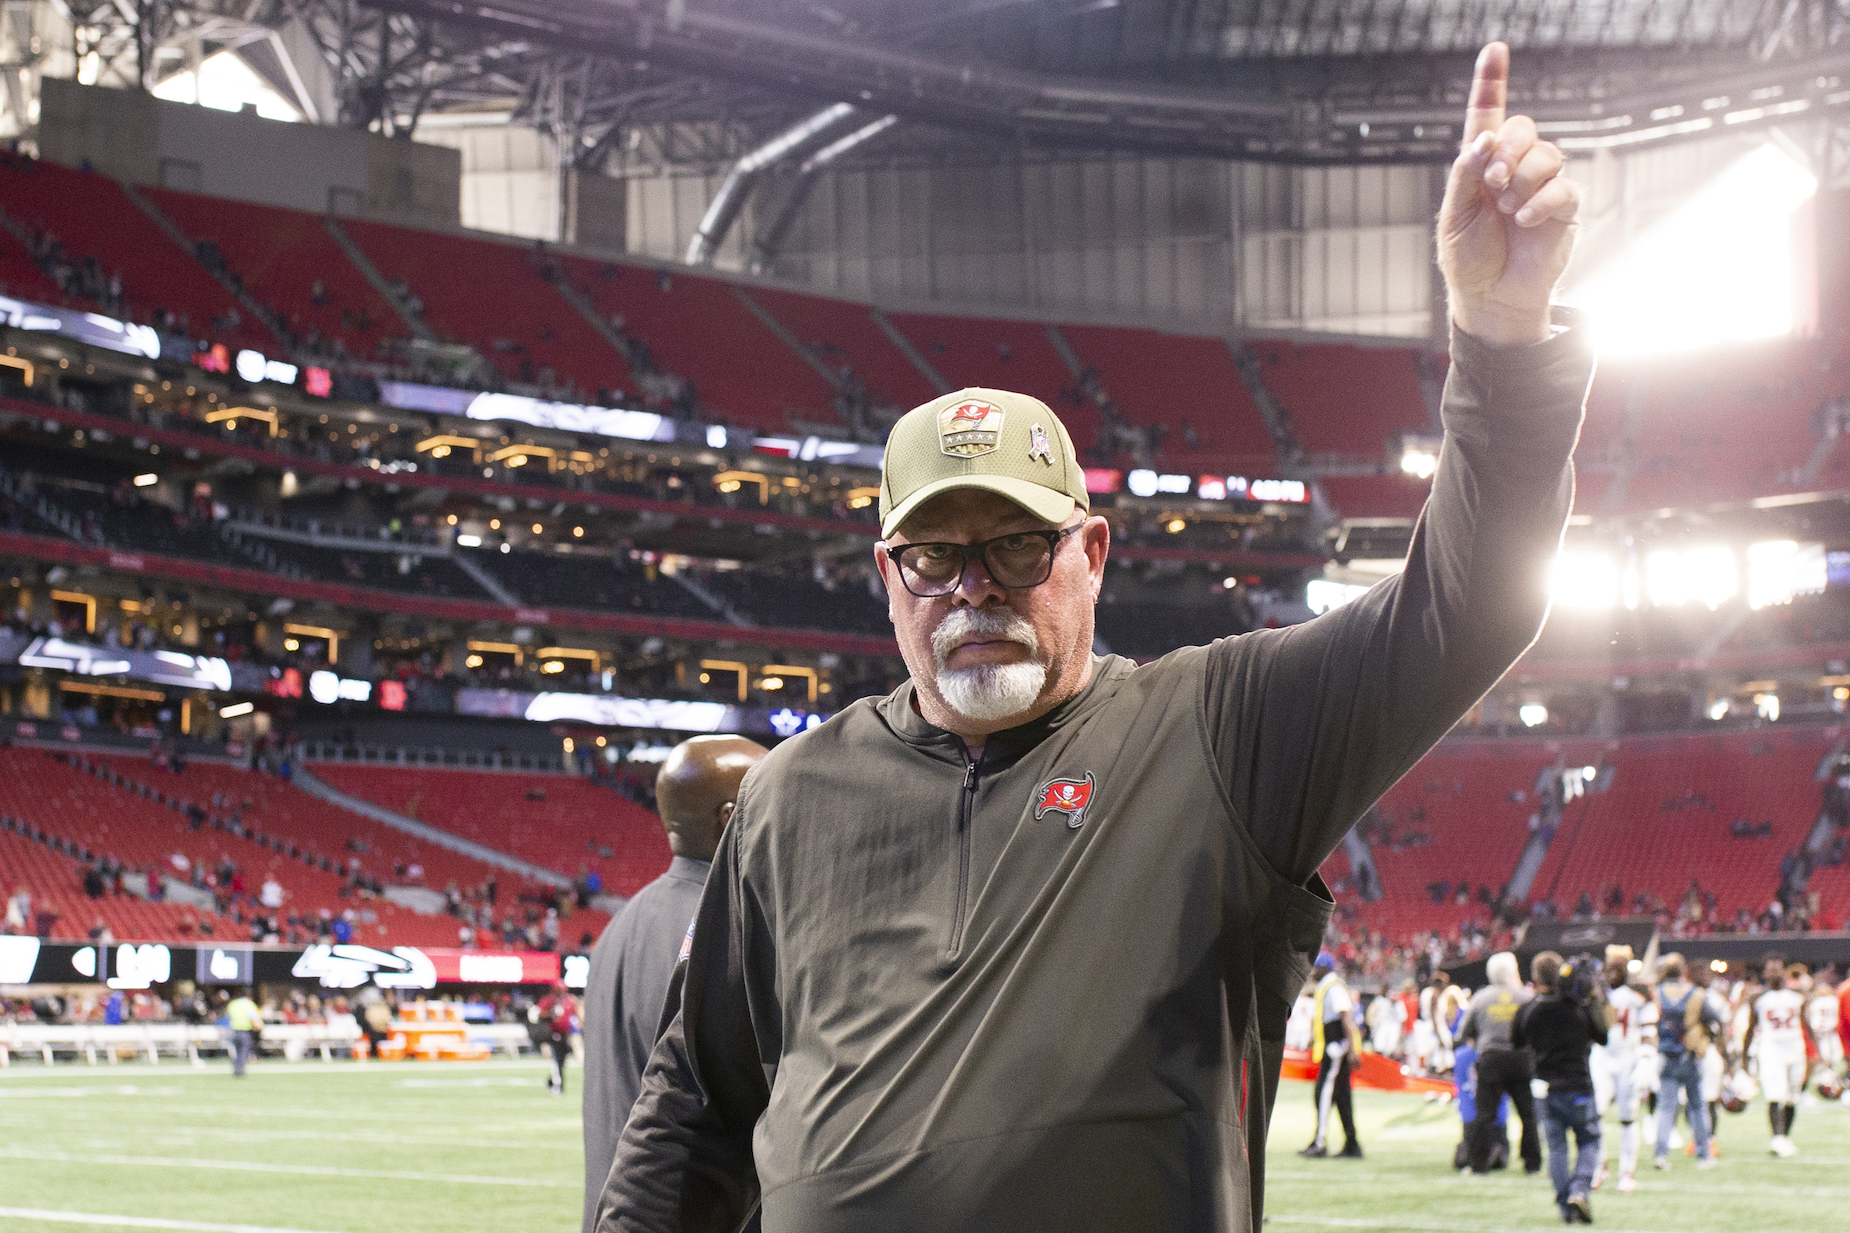 Bruce Arians walks off the field after a 2019 Tampa Bay Buccaneers game